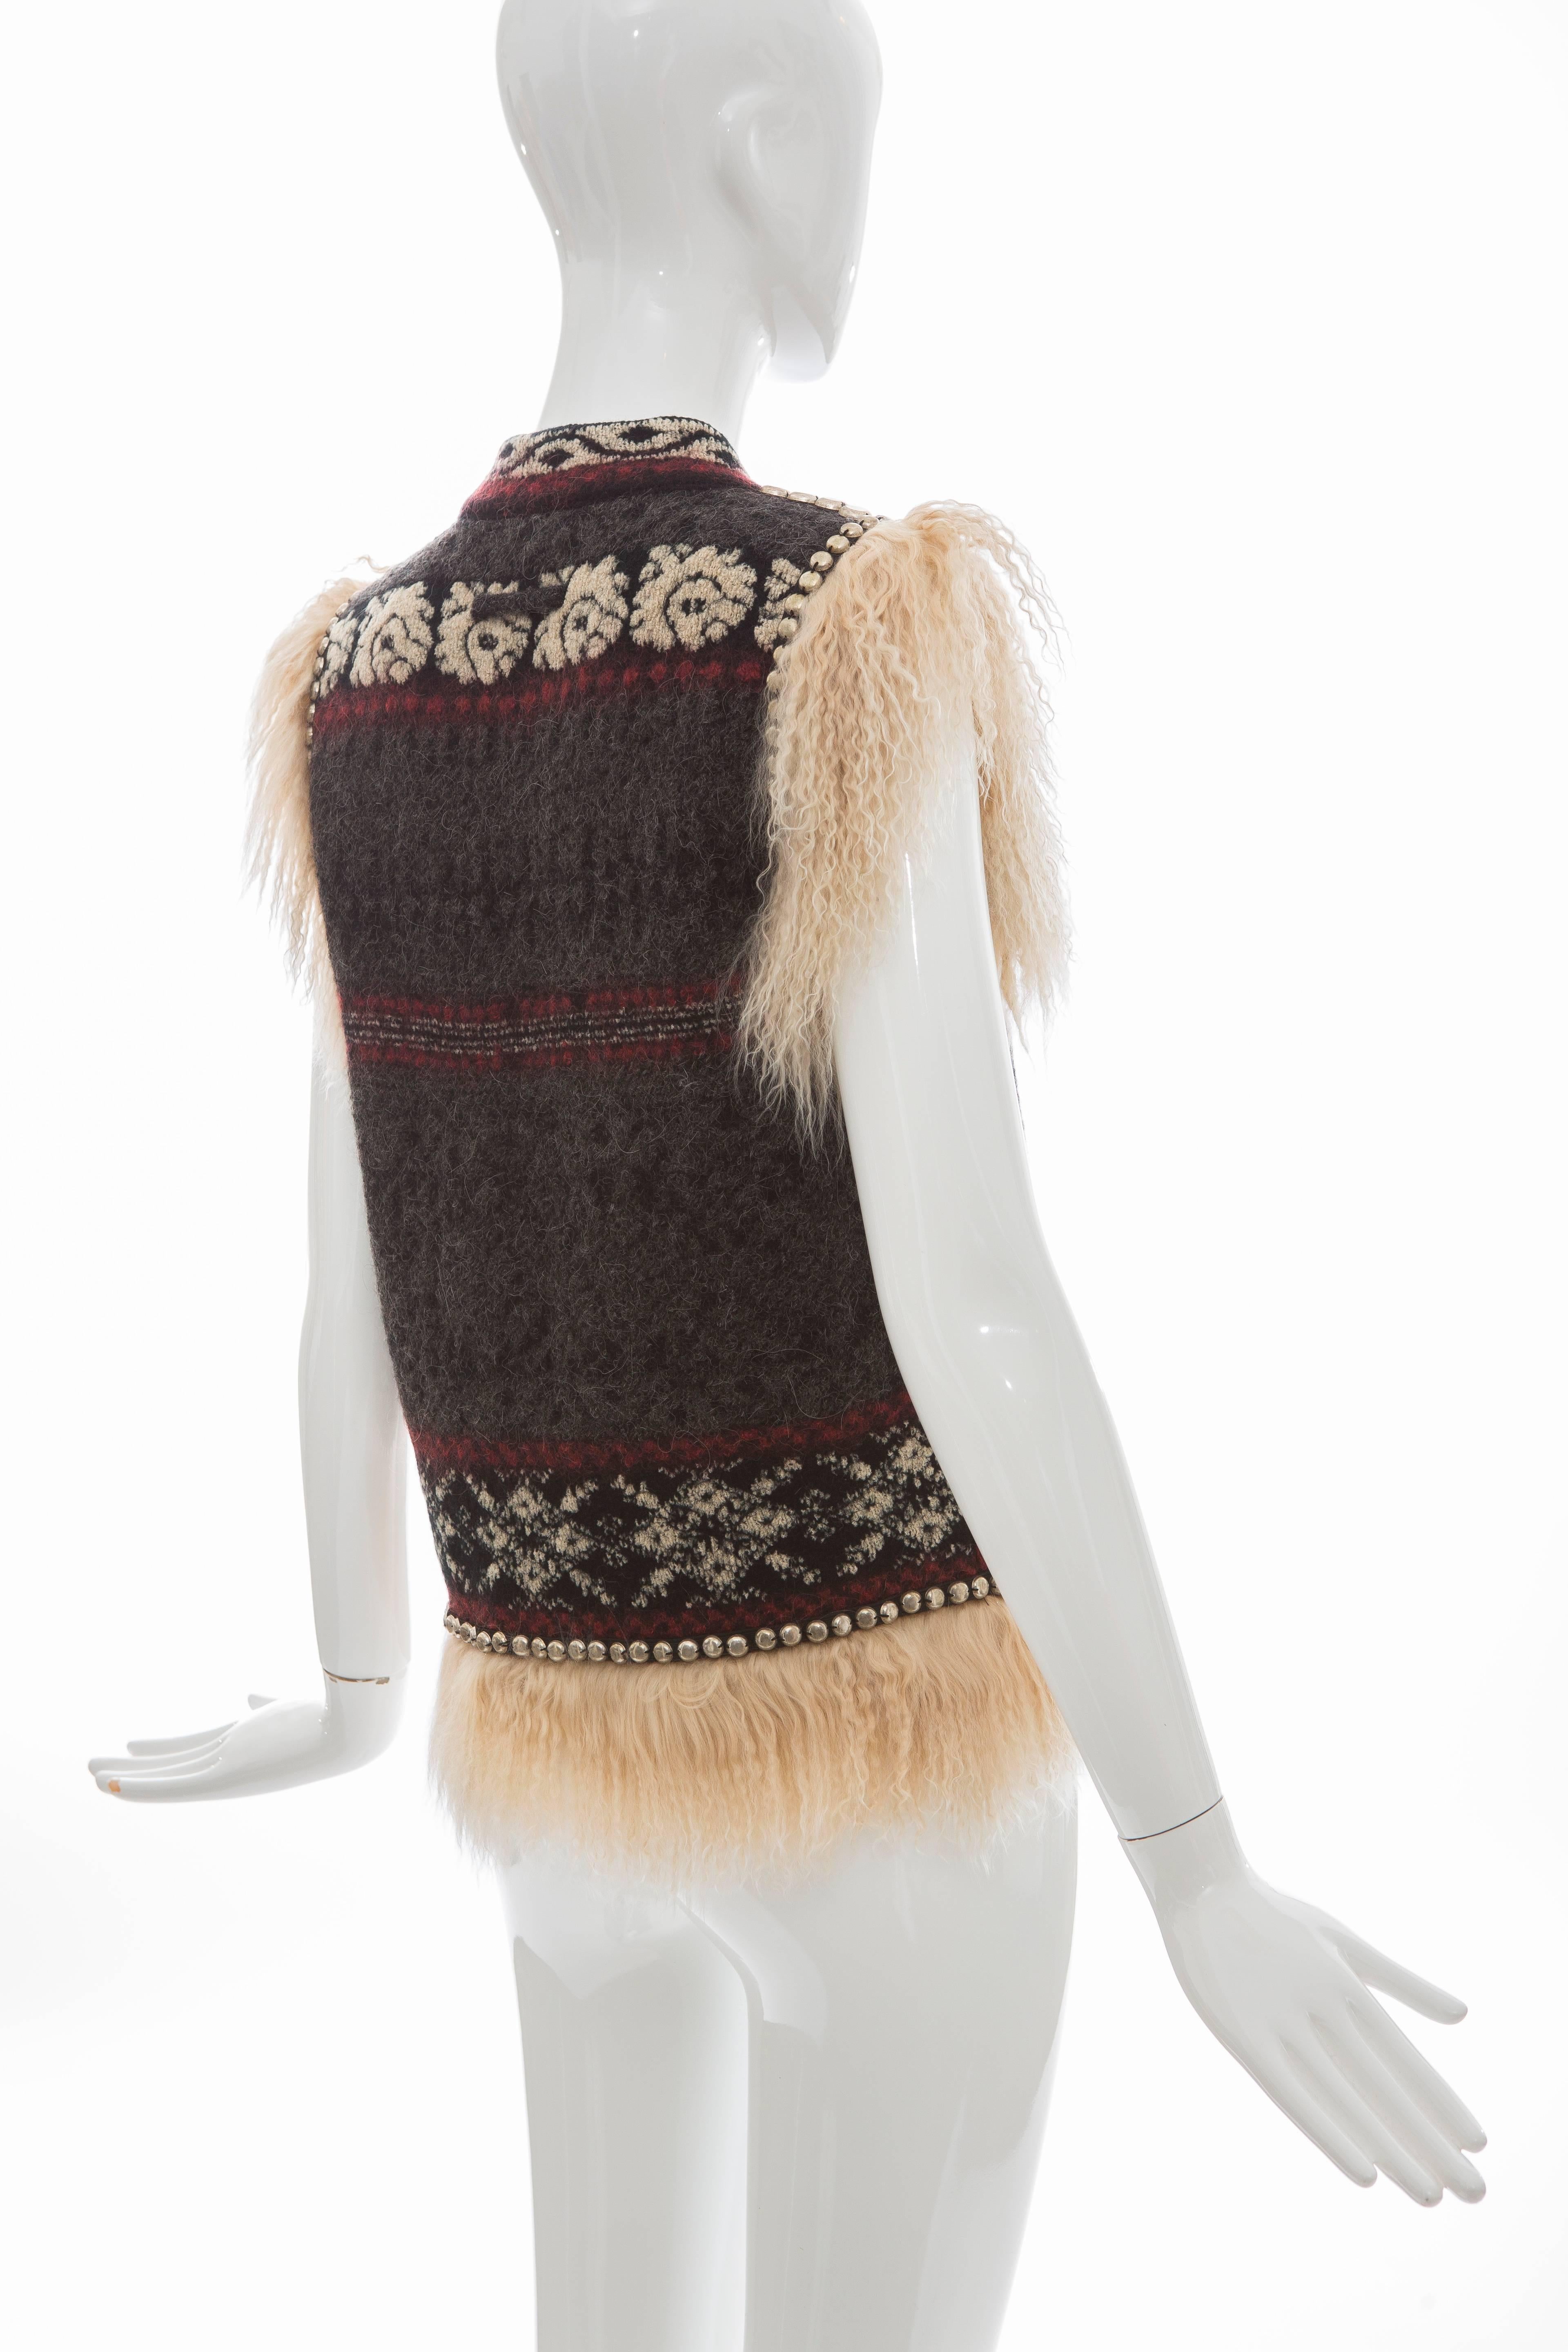 Jean Paul Gaultier Wool Vest With Mongolian Fur Trim, Fall 2010 In Excellent Condition For Sale In Cincinnati, OH